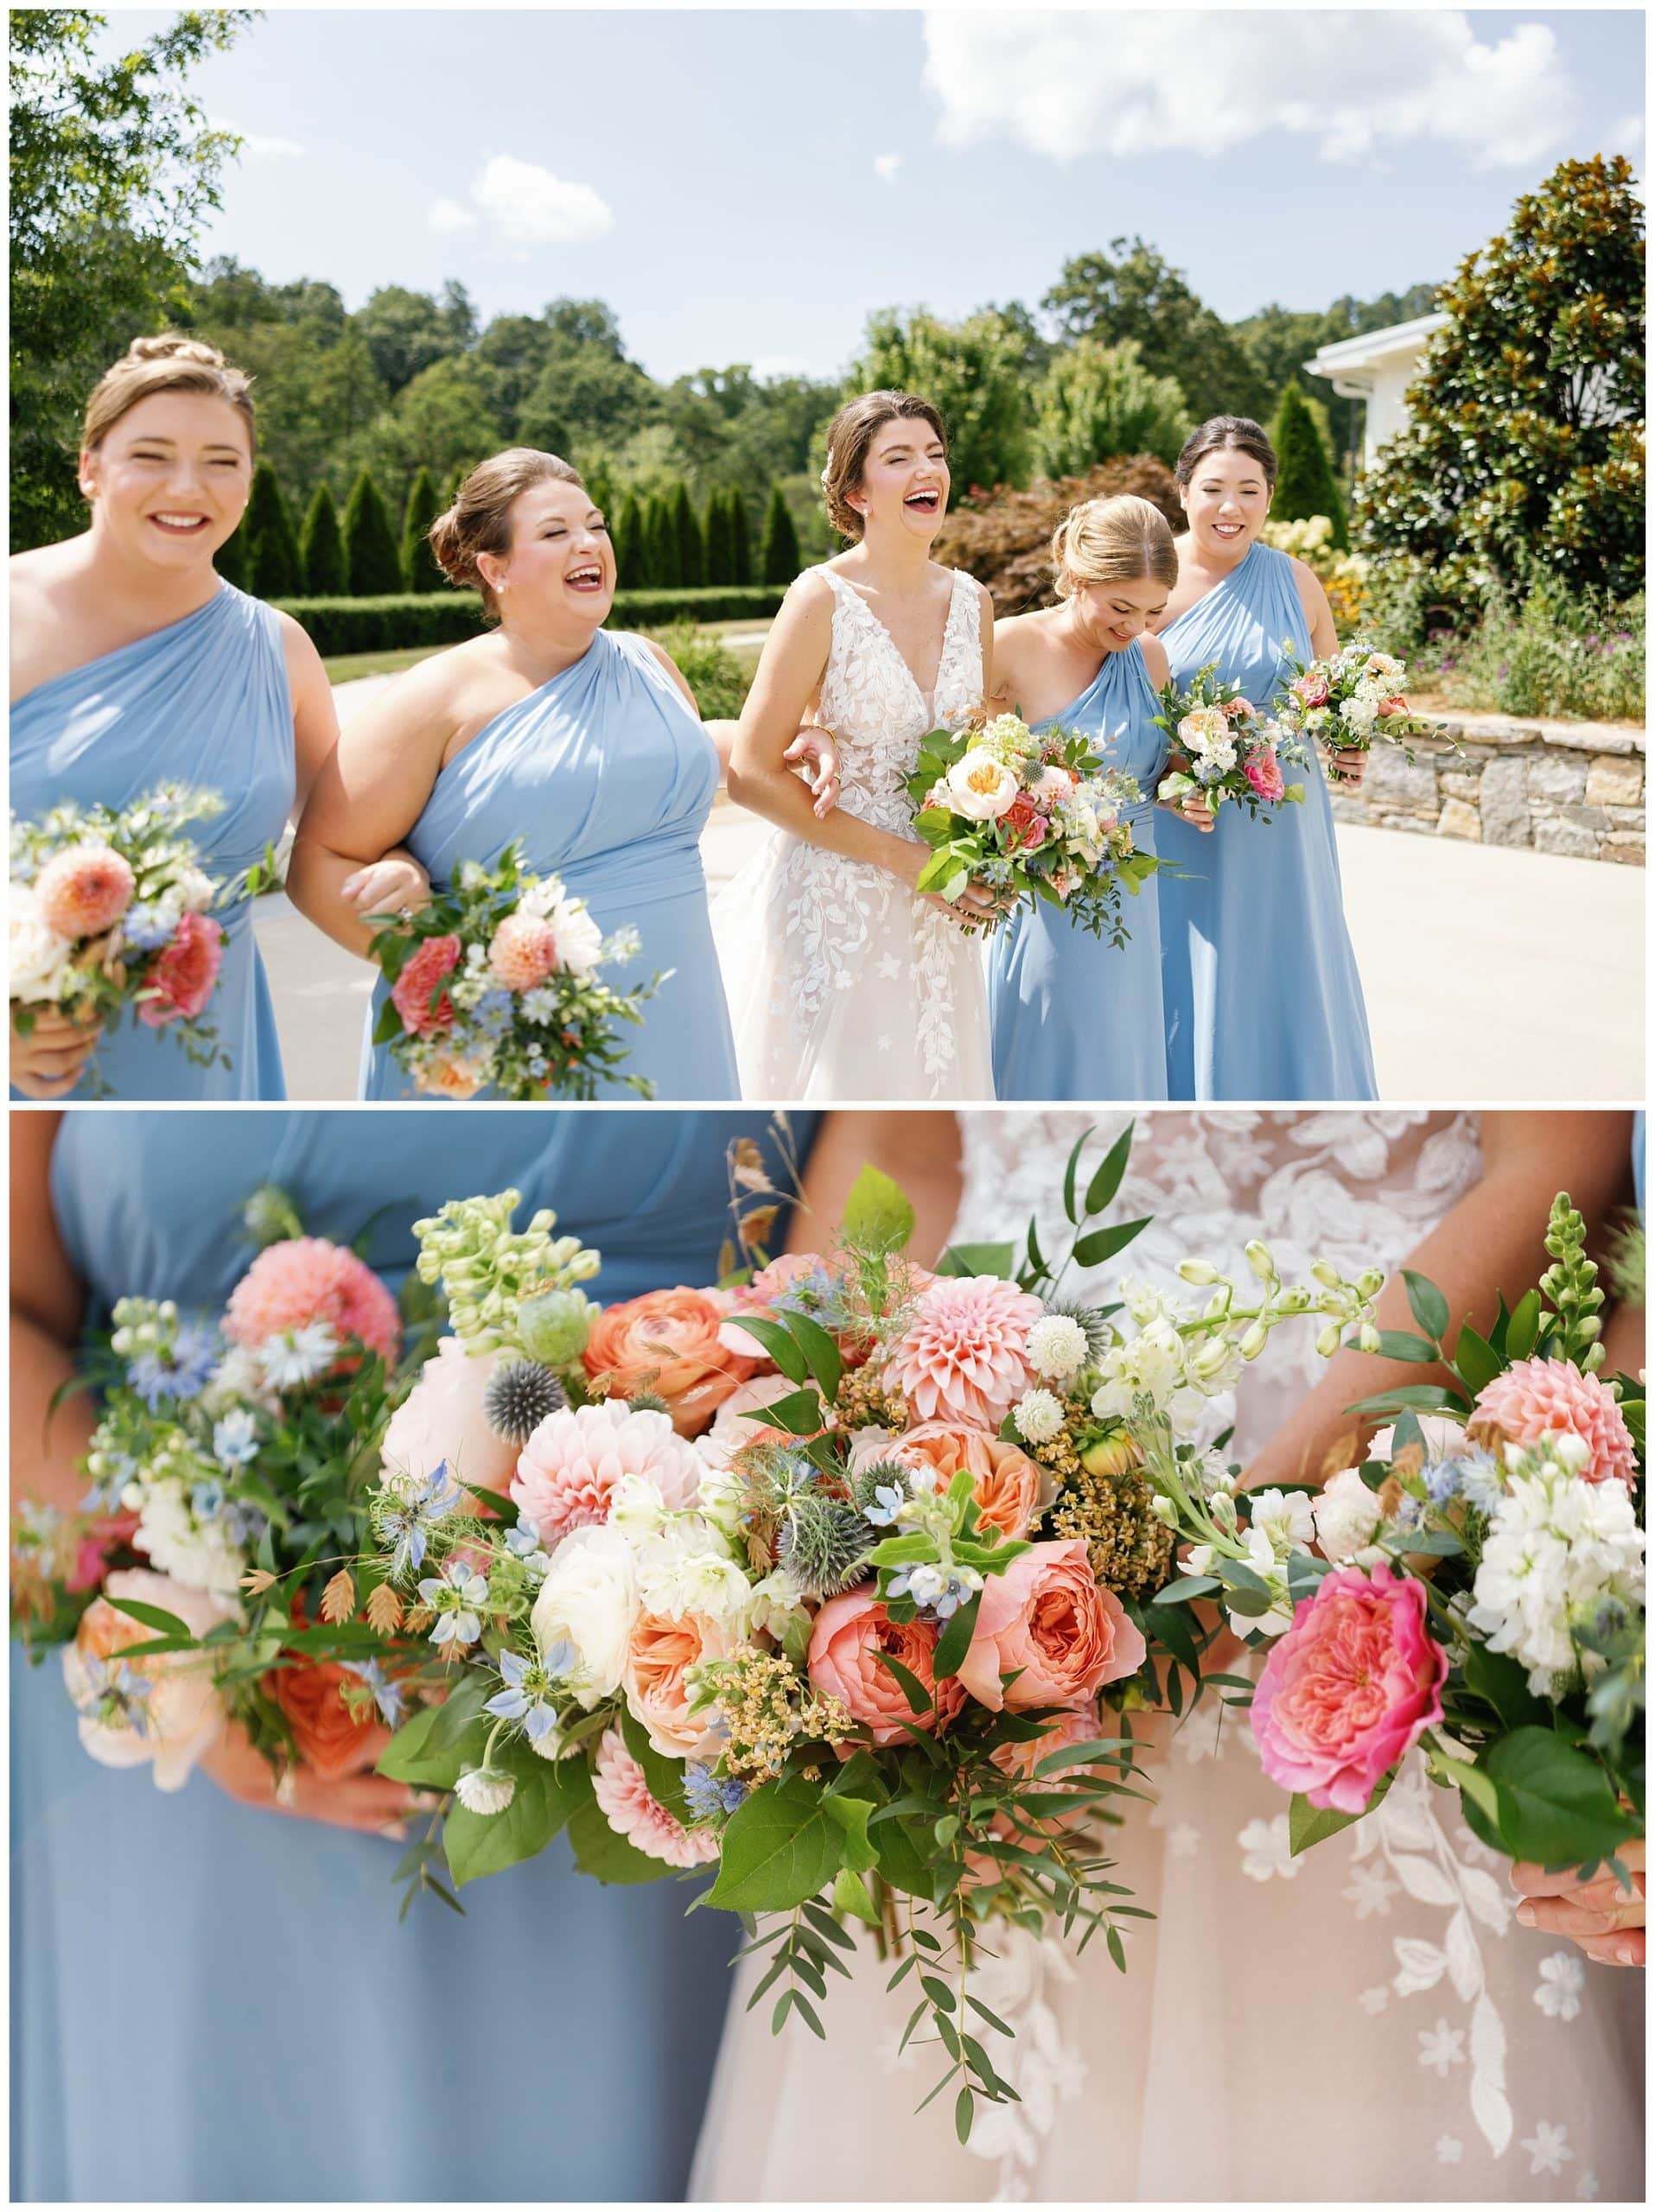 The bride and her bridesmaids with their bouquets.